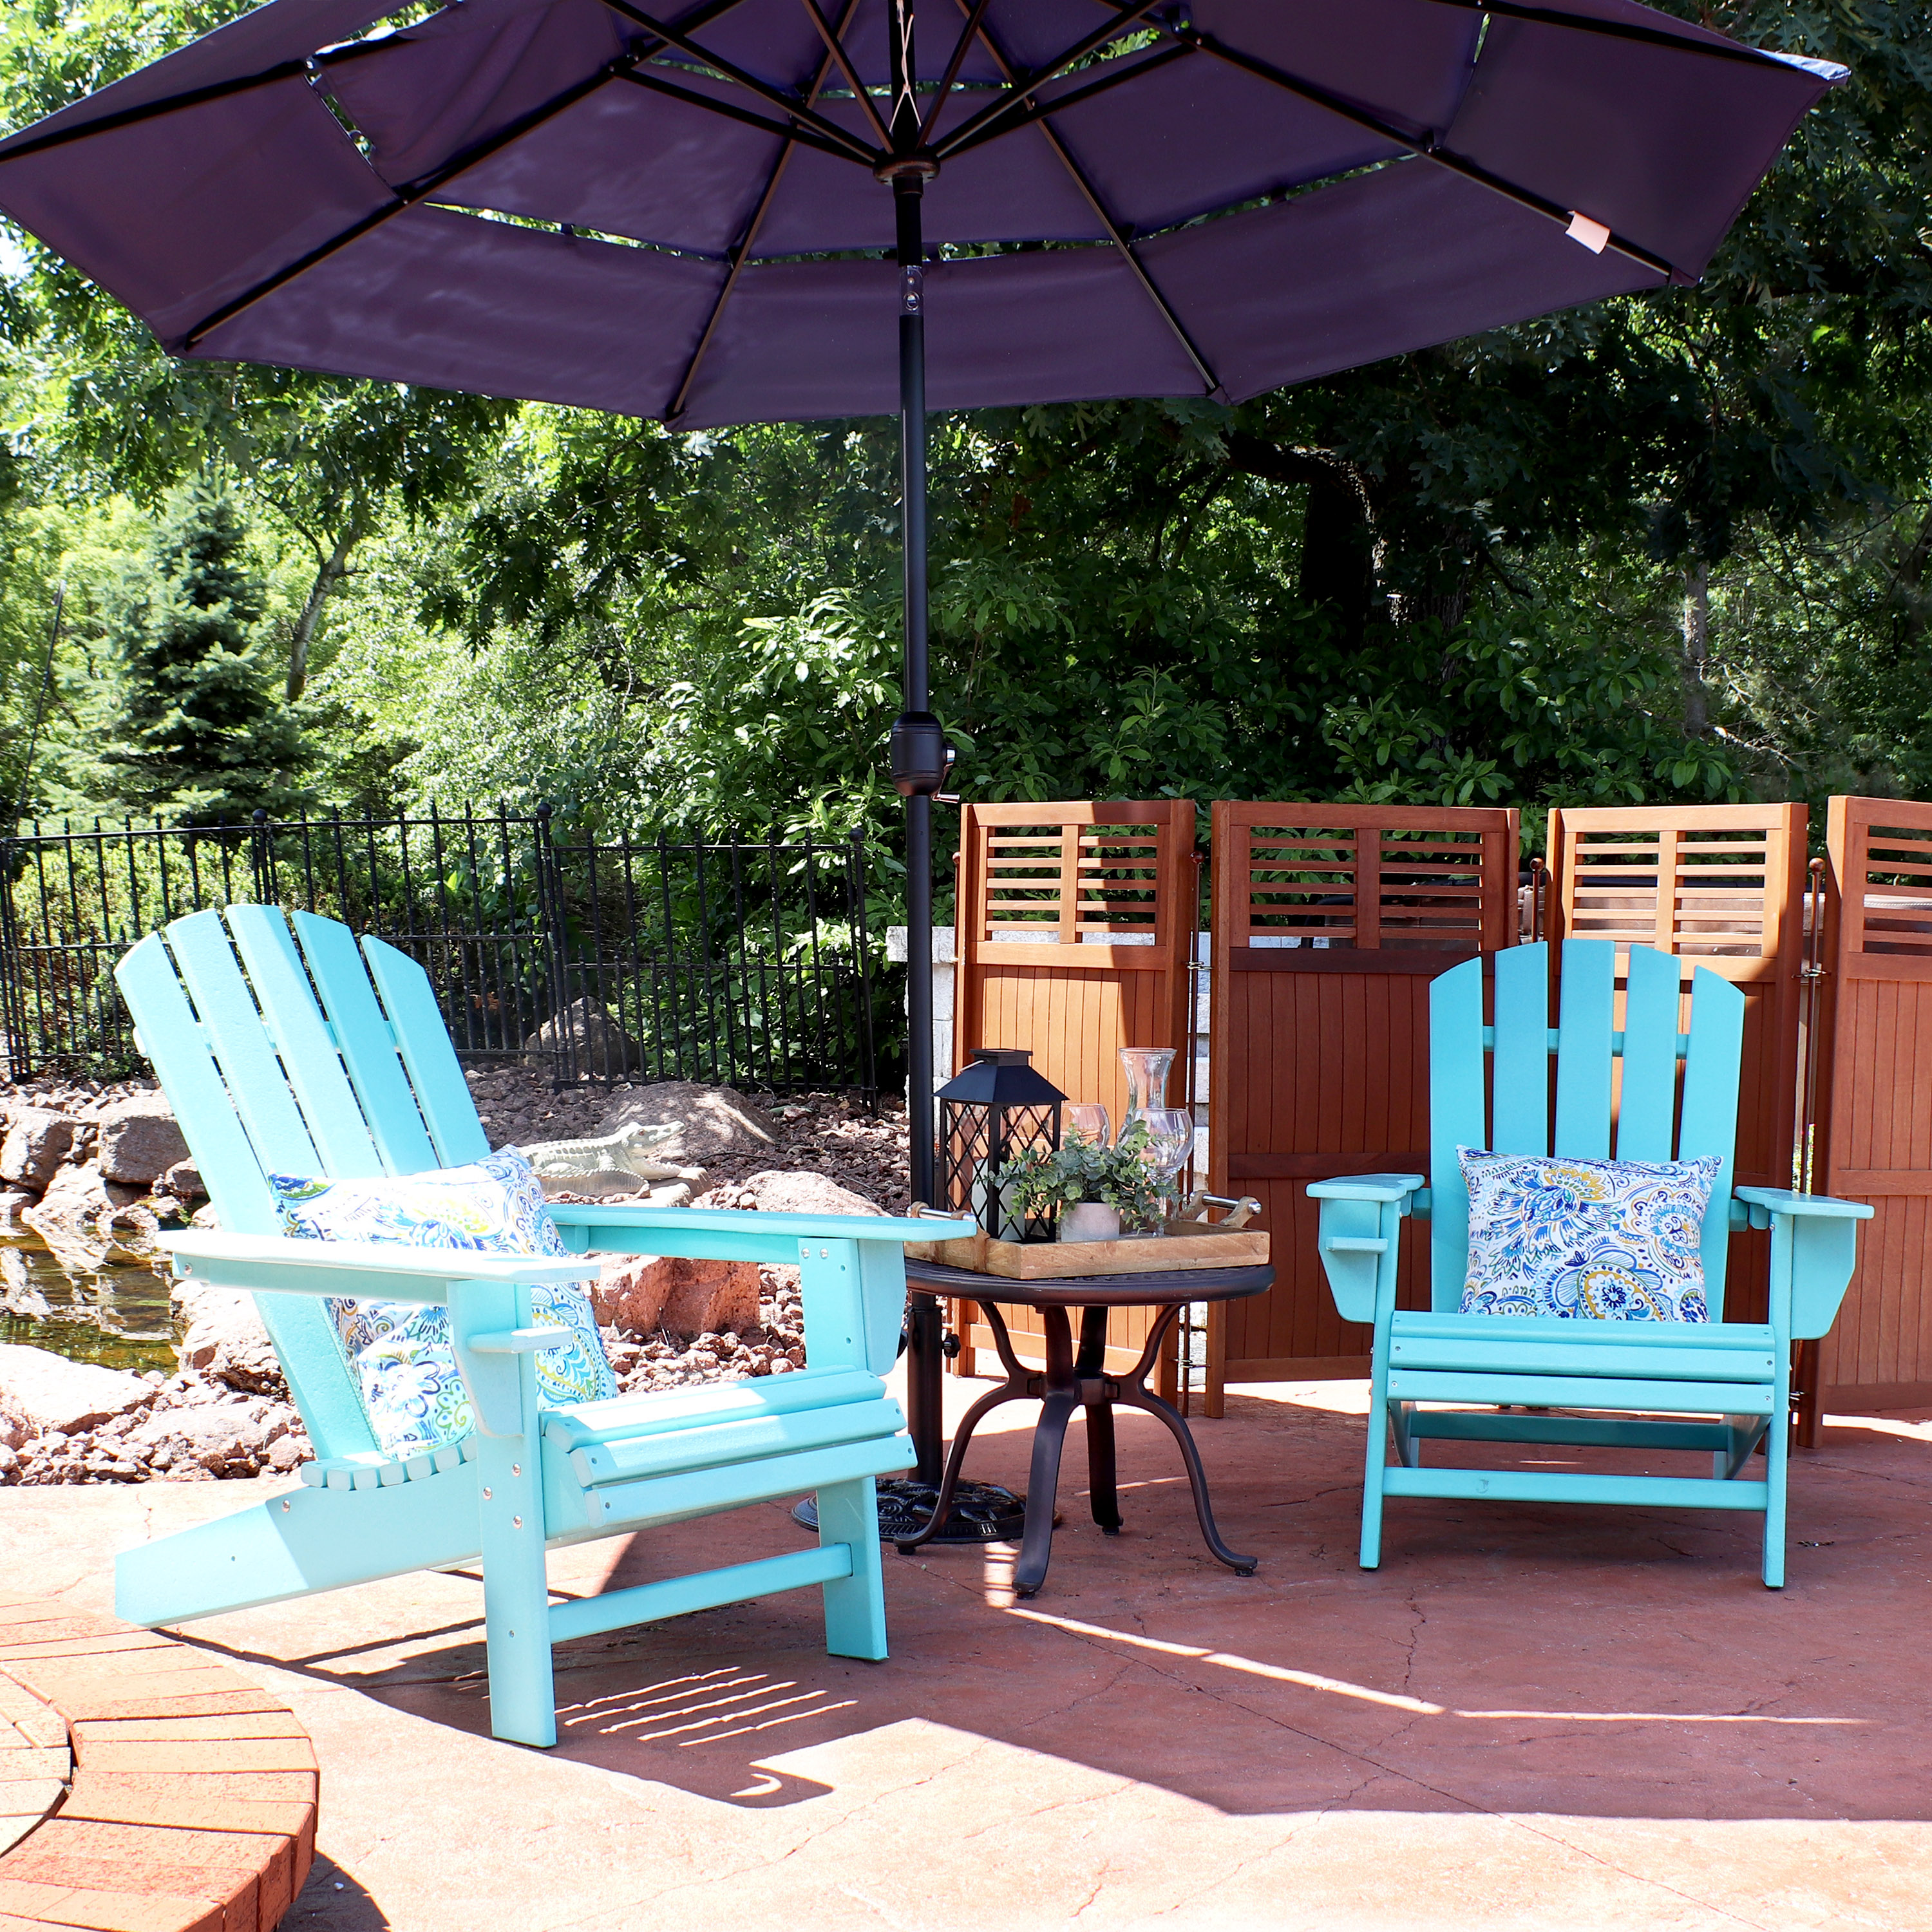 Sunnydaze All-Weather Outdoor Adirondack Chair with Drink Holder - Turquoise - Set of 2 - image 2 of 11